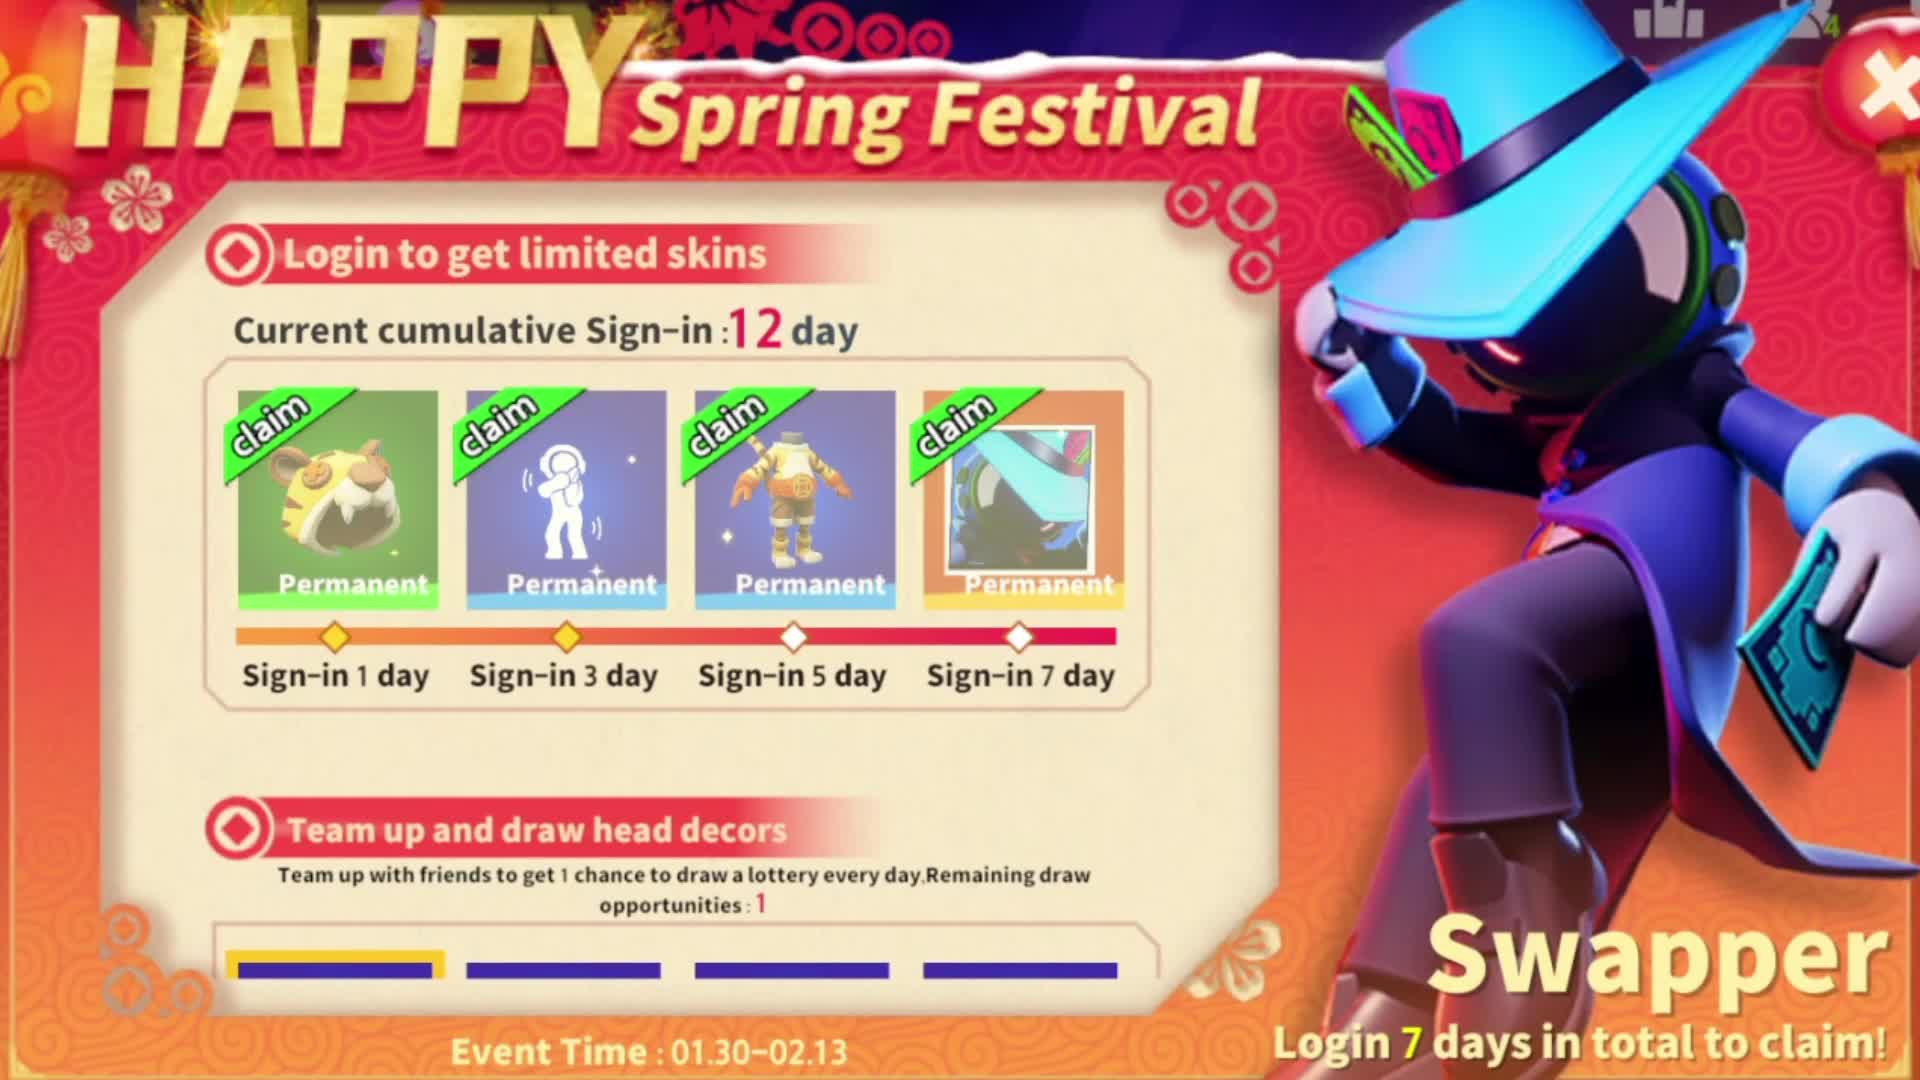 Attention to all Spacecrews The Spring Festival Event is here In